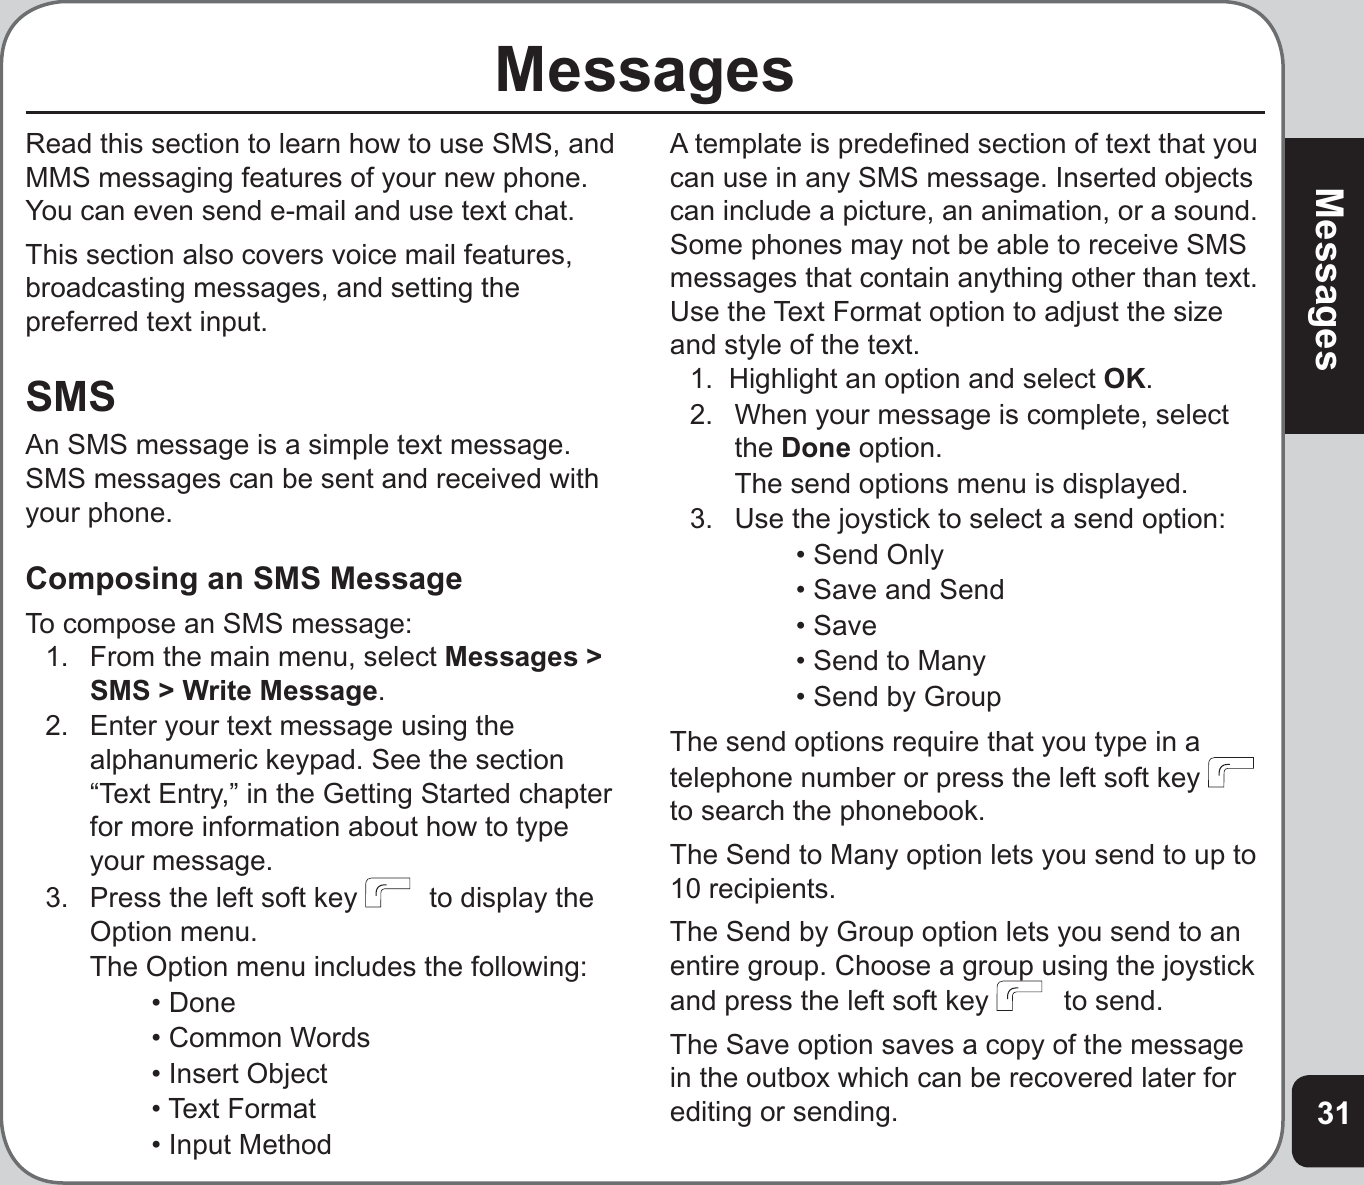 31MessagesMessagesRead this section to learn how to use SMS, and MMS messaging features of your new phone. You can even send e-mail and use text chat.This section also covers voice mail features, broadcasting messages, and setting the preferred text input.SMSAn SMS message is a simple text message. SMS messages can be sent and received with your phone.Composing an SMS MessageTo compose an SMS message:1.  From the main menu, select Messages &gt; SMS &gt; Write Message.2.   Enter your text message using the alphanumeric keypad. See the section “Text Entry,” in the Getting Started chapter  for more information about how to type your message.3.   Press the left soft key    to display the Option menu.  The Option menu includes the following:    • Done    • Common Words    • Insert Object   • Text Format     • Input MethodA template is predeﬁ ned section of text that you can use in any SMS message. Inserted objects can include a picture, an animation, or a sound. Some phones may not be able to receive SMS messages that contain anything other than text. Use the Text Format option to adjust the size and style of the text.1.  Highlight an option and select OK.2.  When your message is complete, select the Done option.  The send options menu is displayed.3.  Use the joystick to select a send option:    • Send Only    • Save and Send   • Save     • Send to Many    • Send by GroupThe send options require that you type in a telephone number or press the left soft key to search the phonebook. The Send to Many option lets you send to up to 10 recipients.The Send by Group option lets you send to an entire group. Choose a group using the joystick and press the left soft key    to send.The Save option saves a copy of the message in the outbox which can be recovered later for editing or sending.